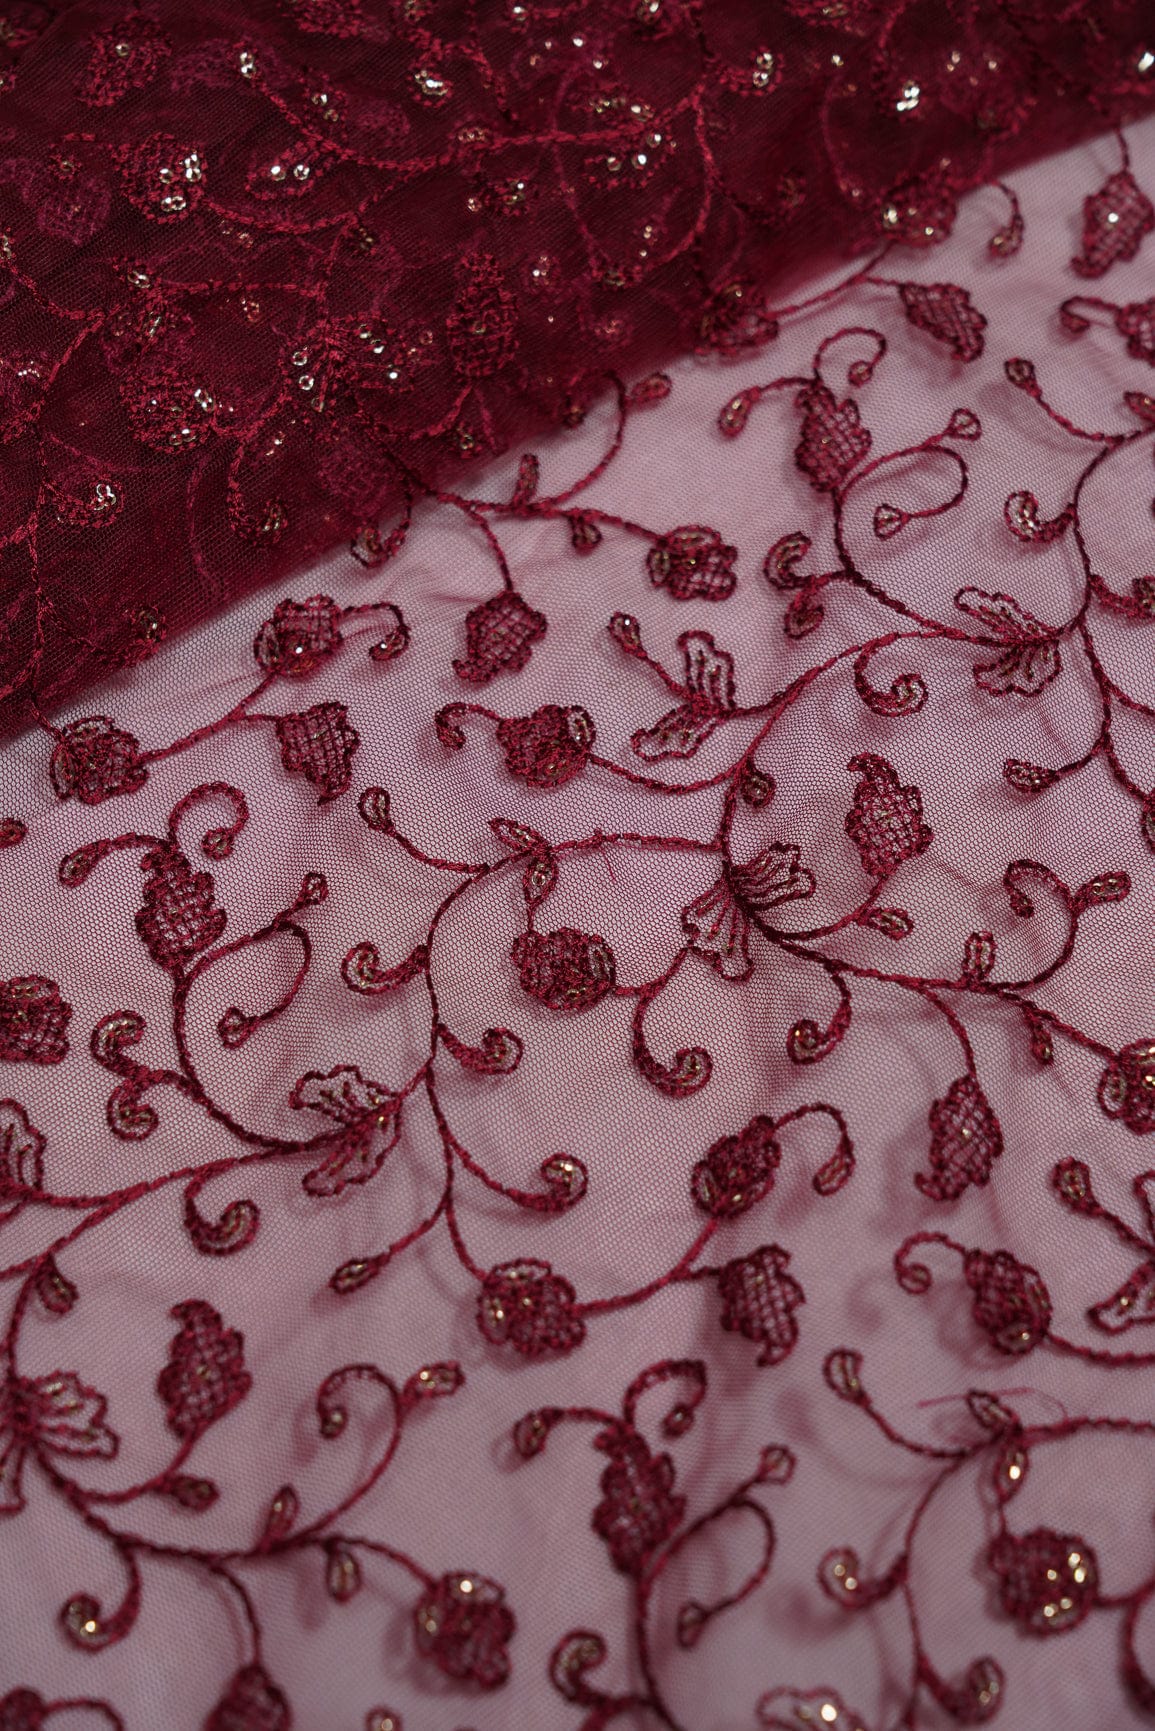 doeraa Embroidery Fabrics 3 Meter Cut Piece Of Gold Sequins With Maroon Thread Embroidery Work On Maroon Soft Net Fabric